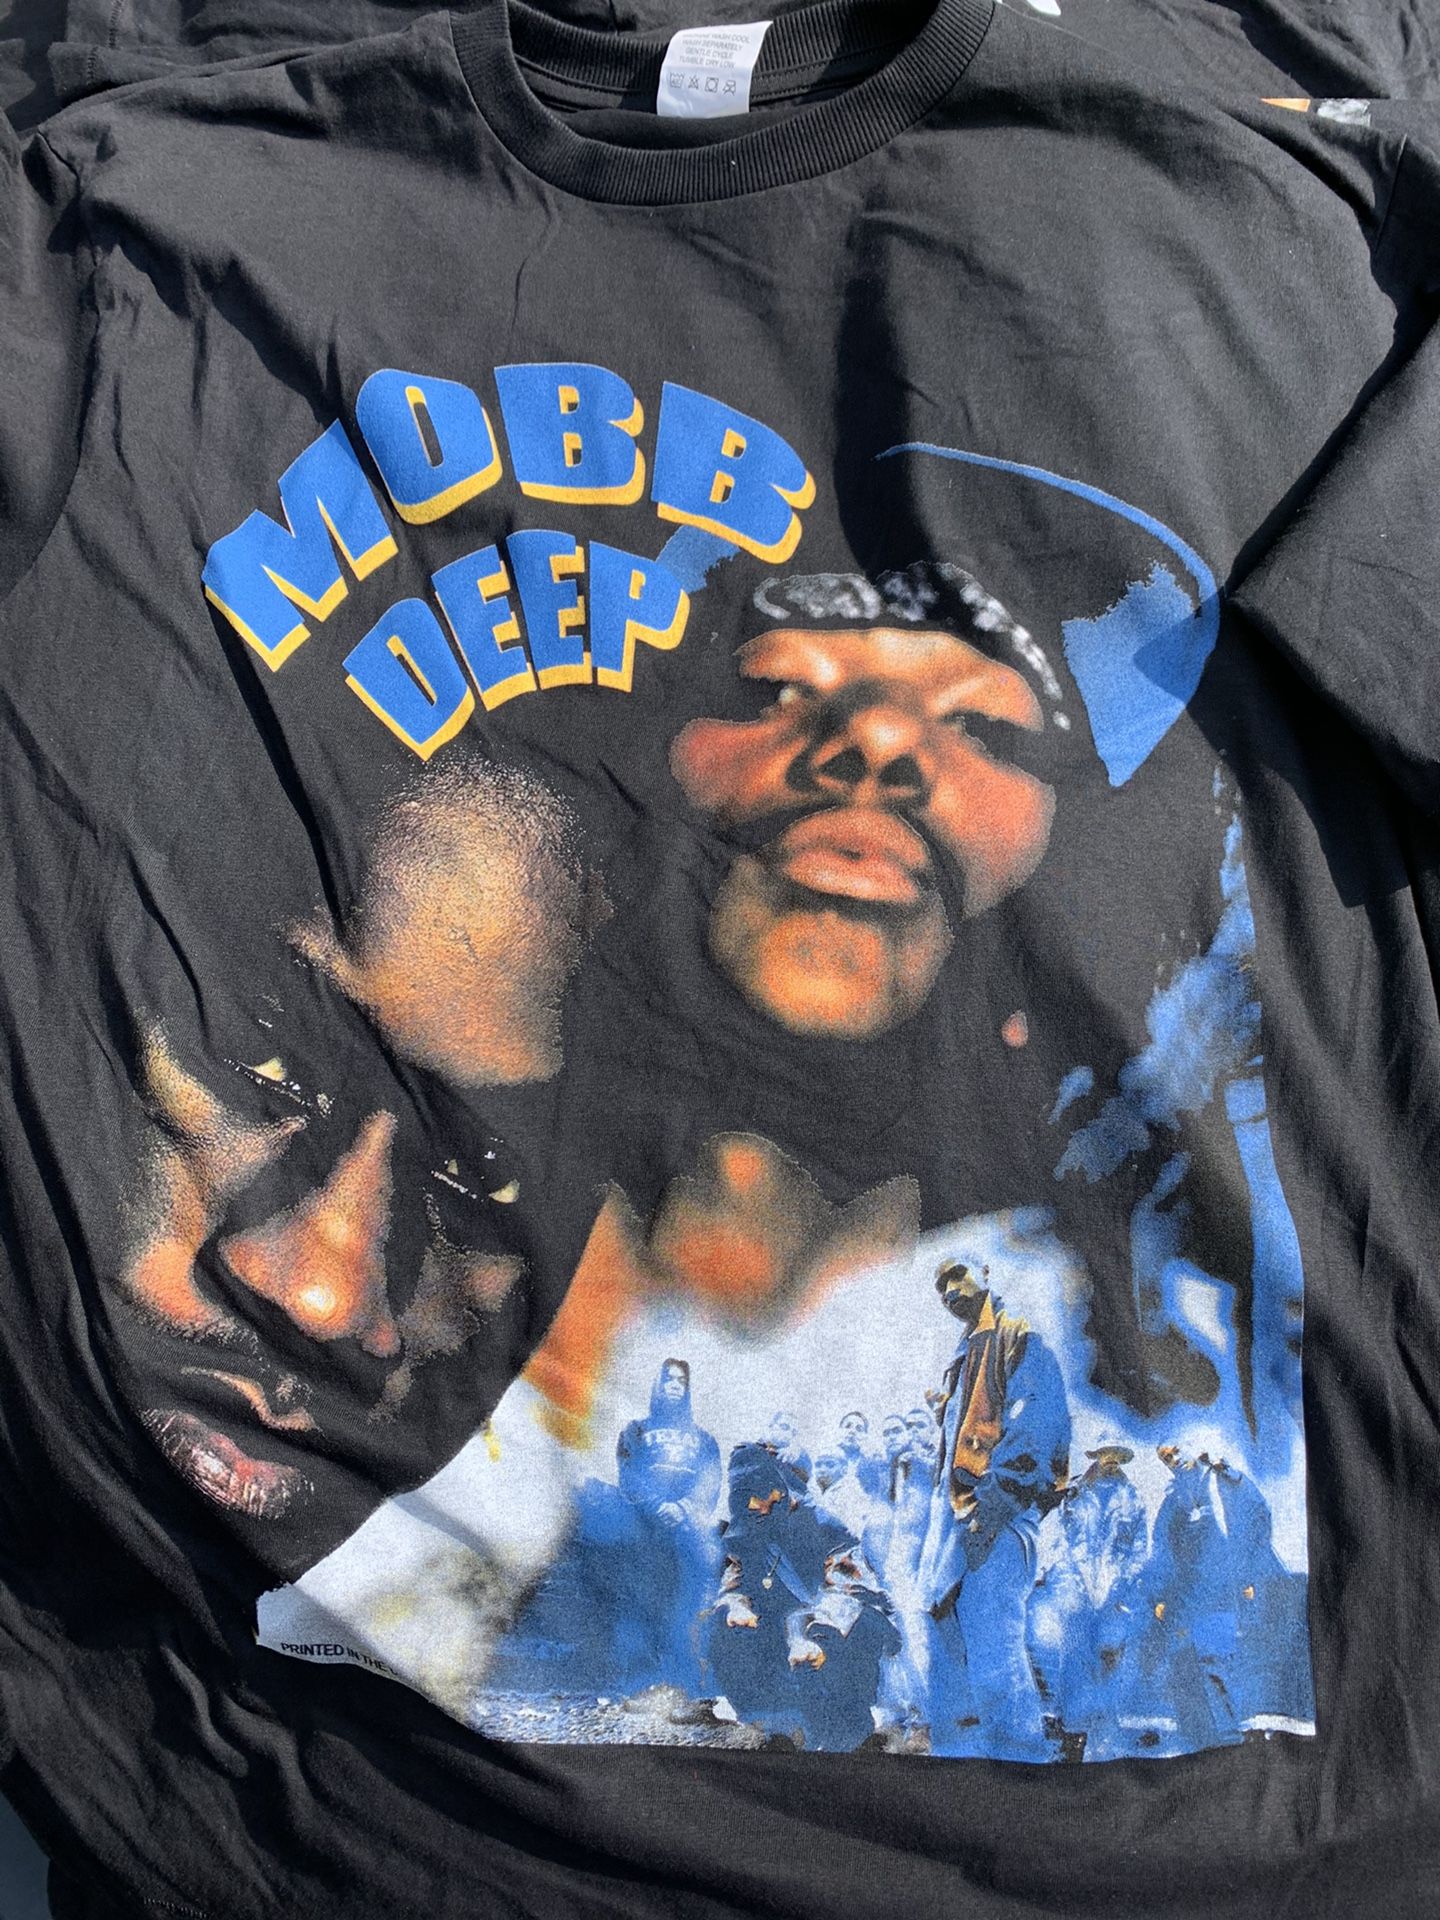 Mobb deep survival of the fittest XL